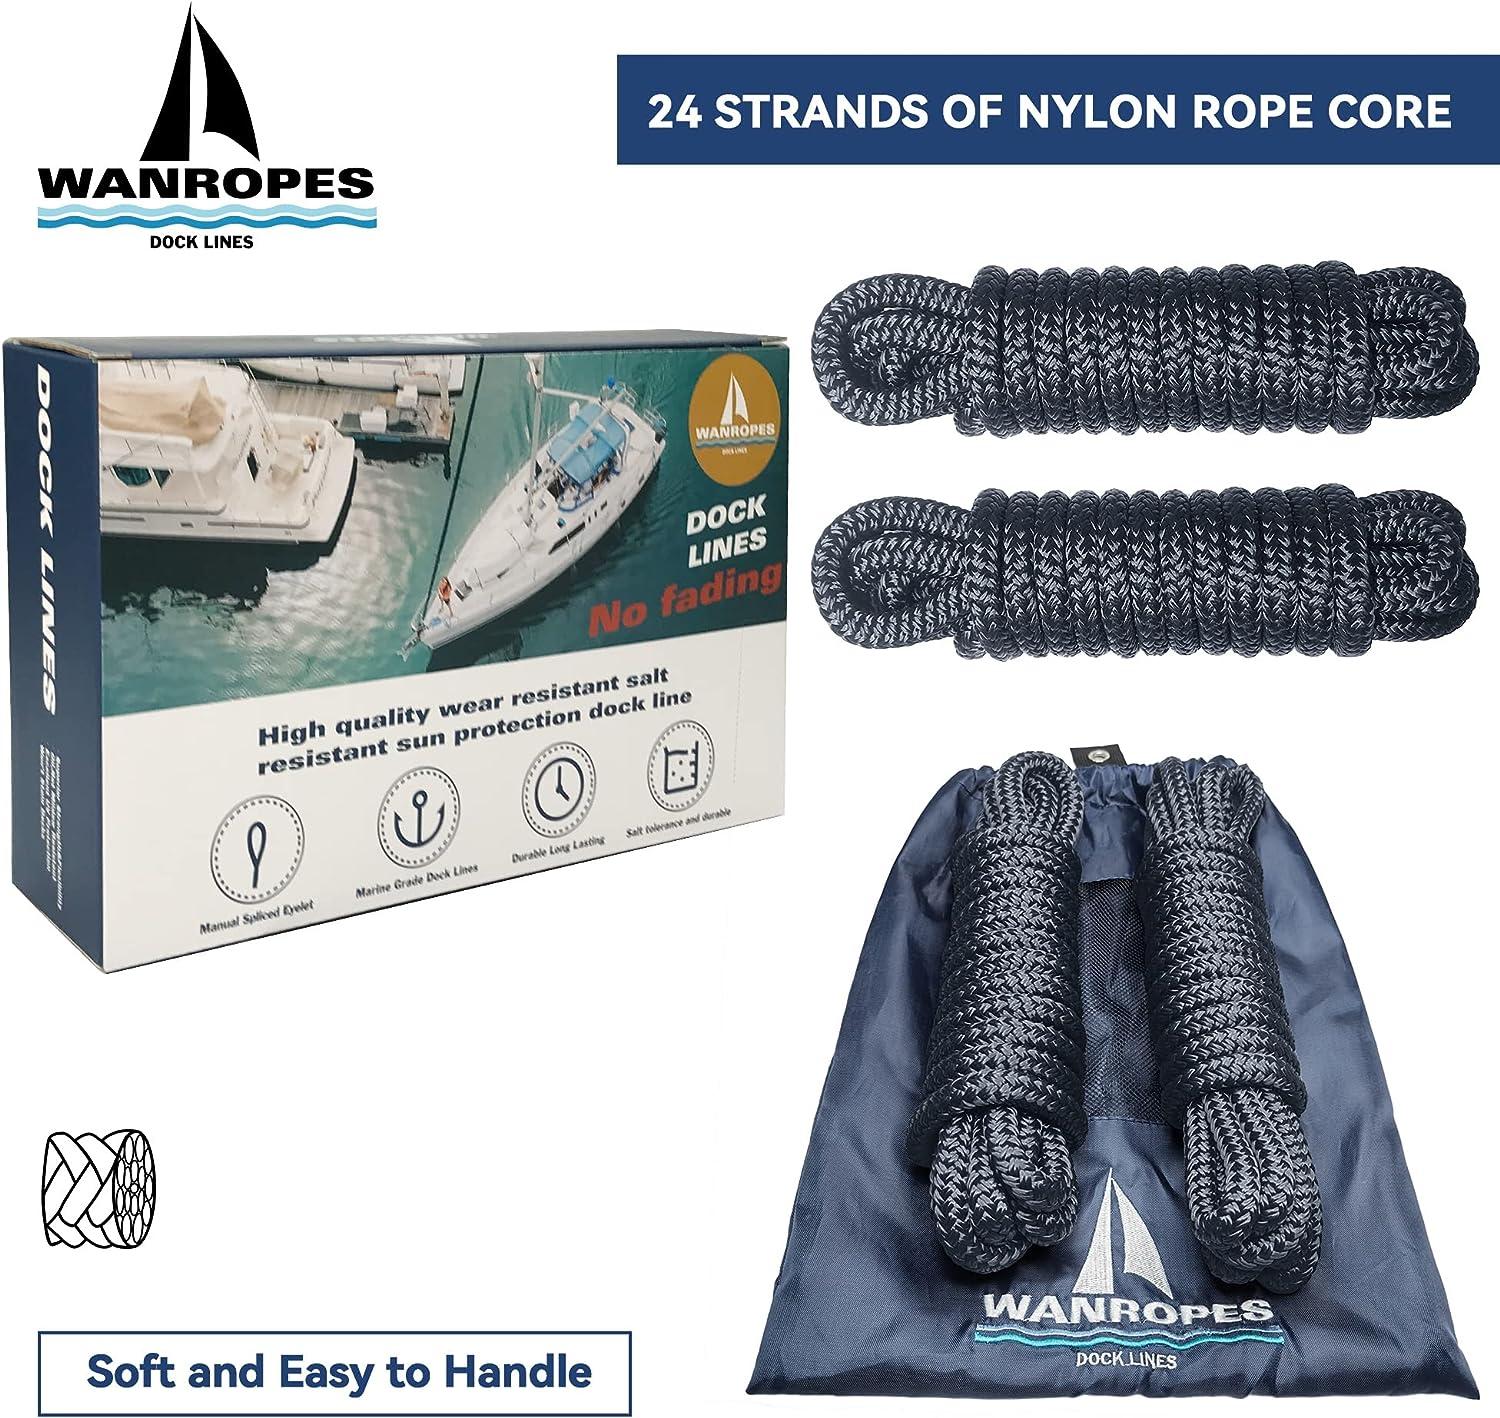 Wanropes Dock Lines Boat Ropes for Docking 1/2 15FT Double Braided Nylon Mooring  Marine Rope Boat 2 Pack for Boats, Marine Rope, Small Boat Accessories  1/2x15' (2PK)